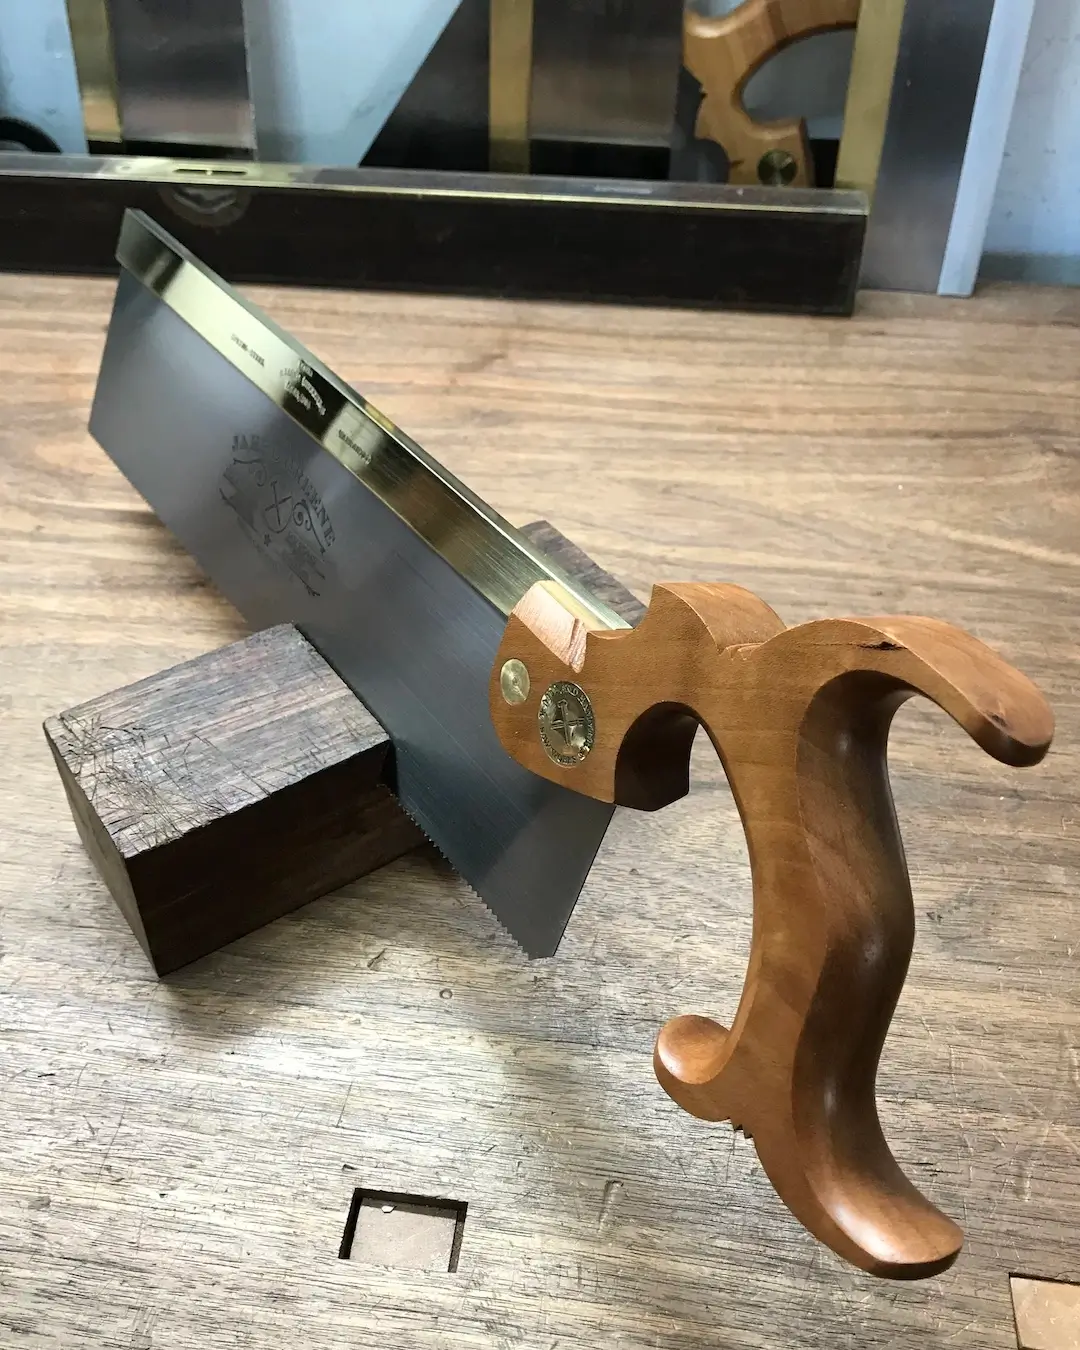 A twelve inch carcass saw with my standard handle in cherry wood.